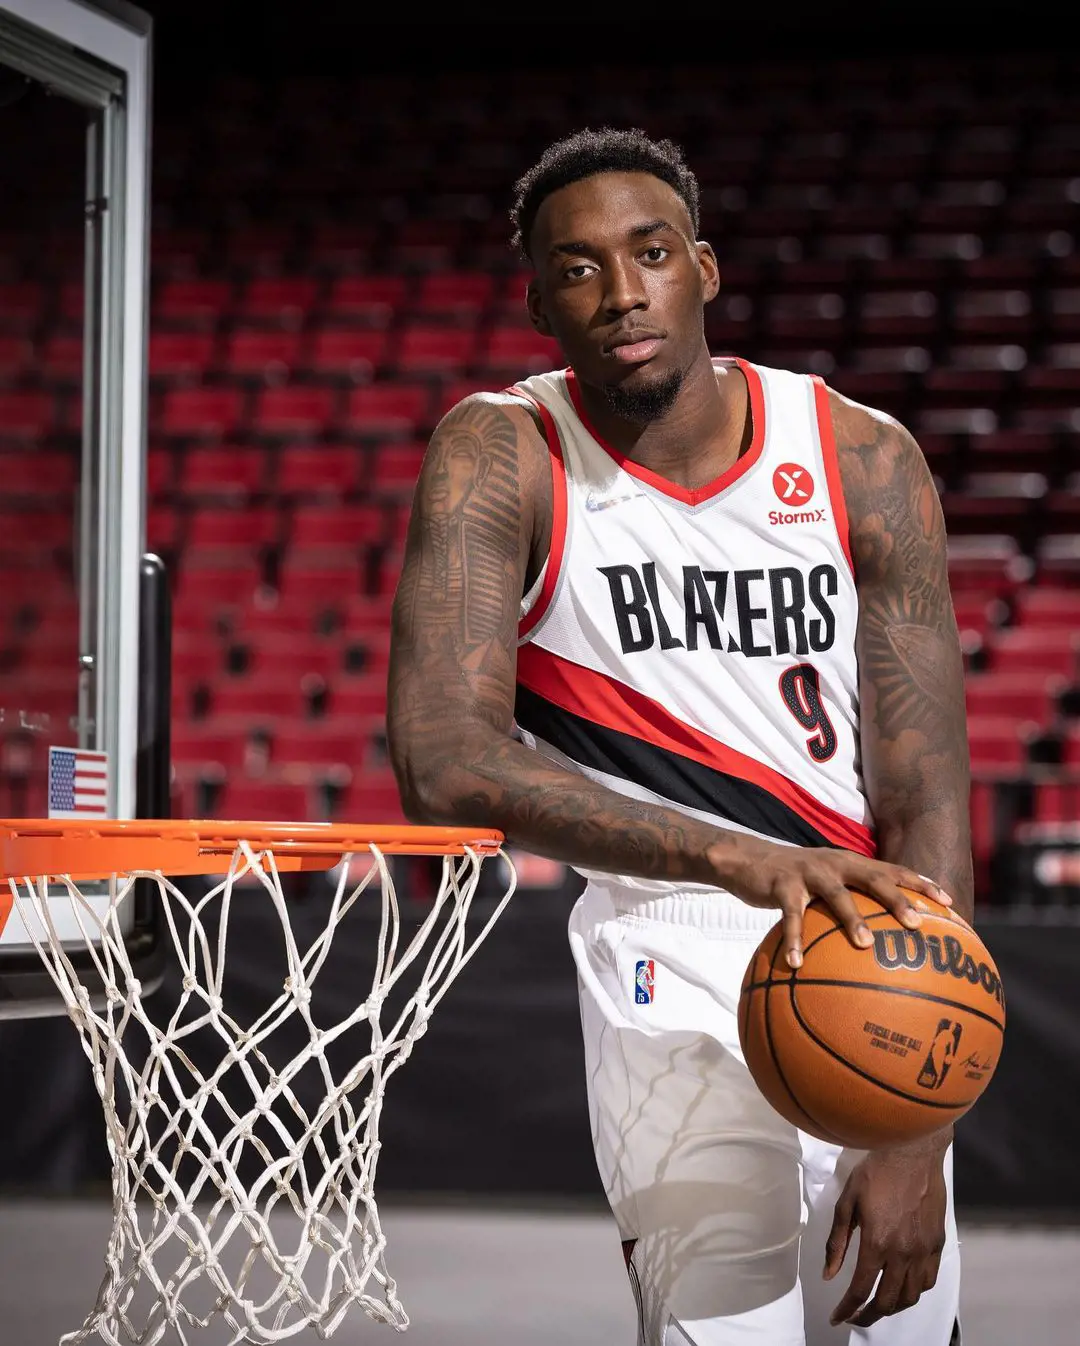 Little in the Blazers jersey, he was signed to the team in 2019 and has not revealed his plans of switching to any other NBA team